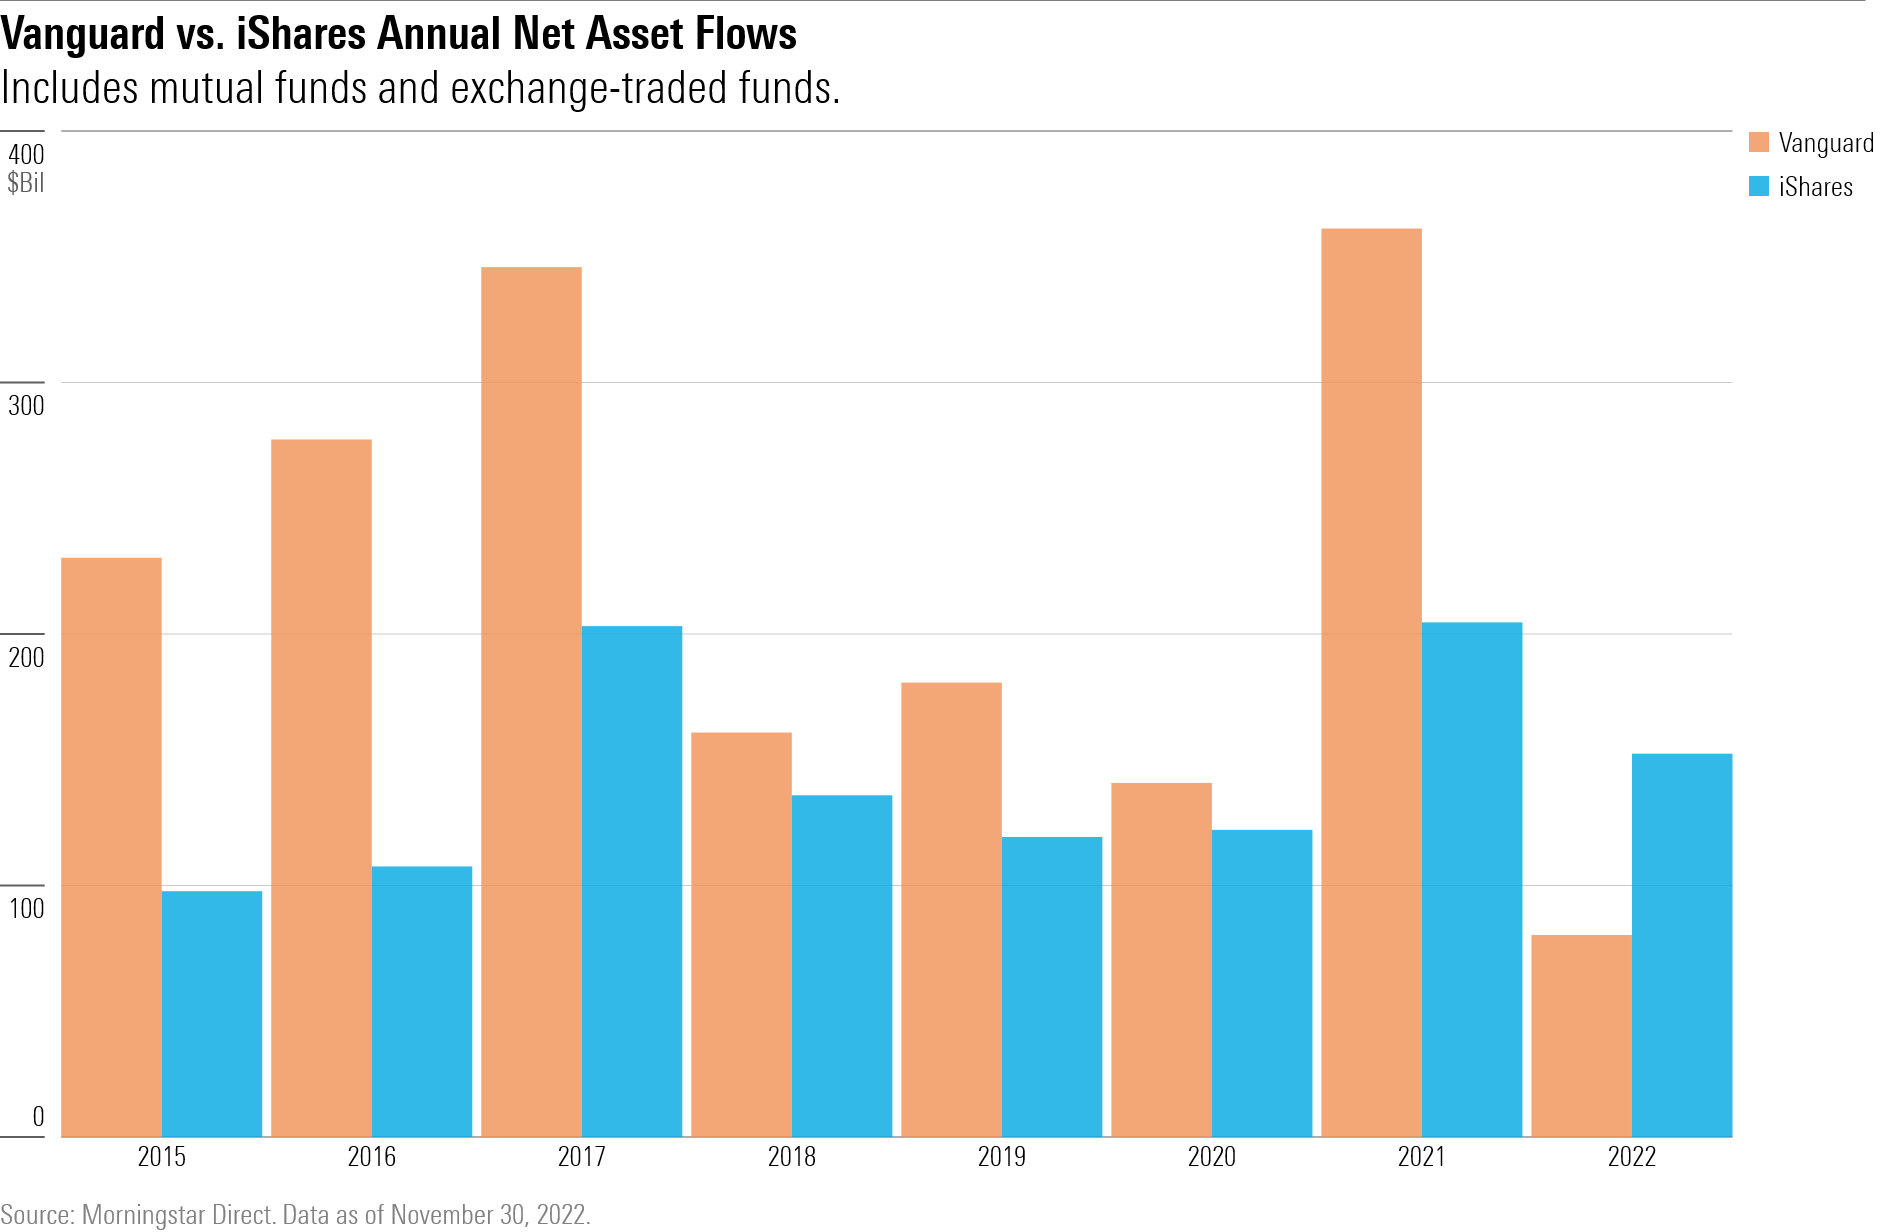 A bar chart showing the net assets of Vanguard and iShares mutual funds and exchange-traded funds